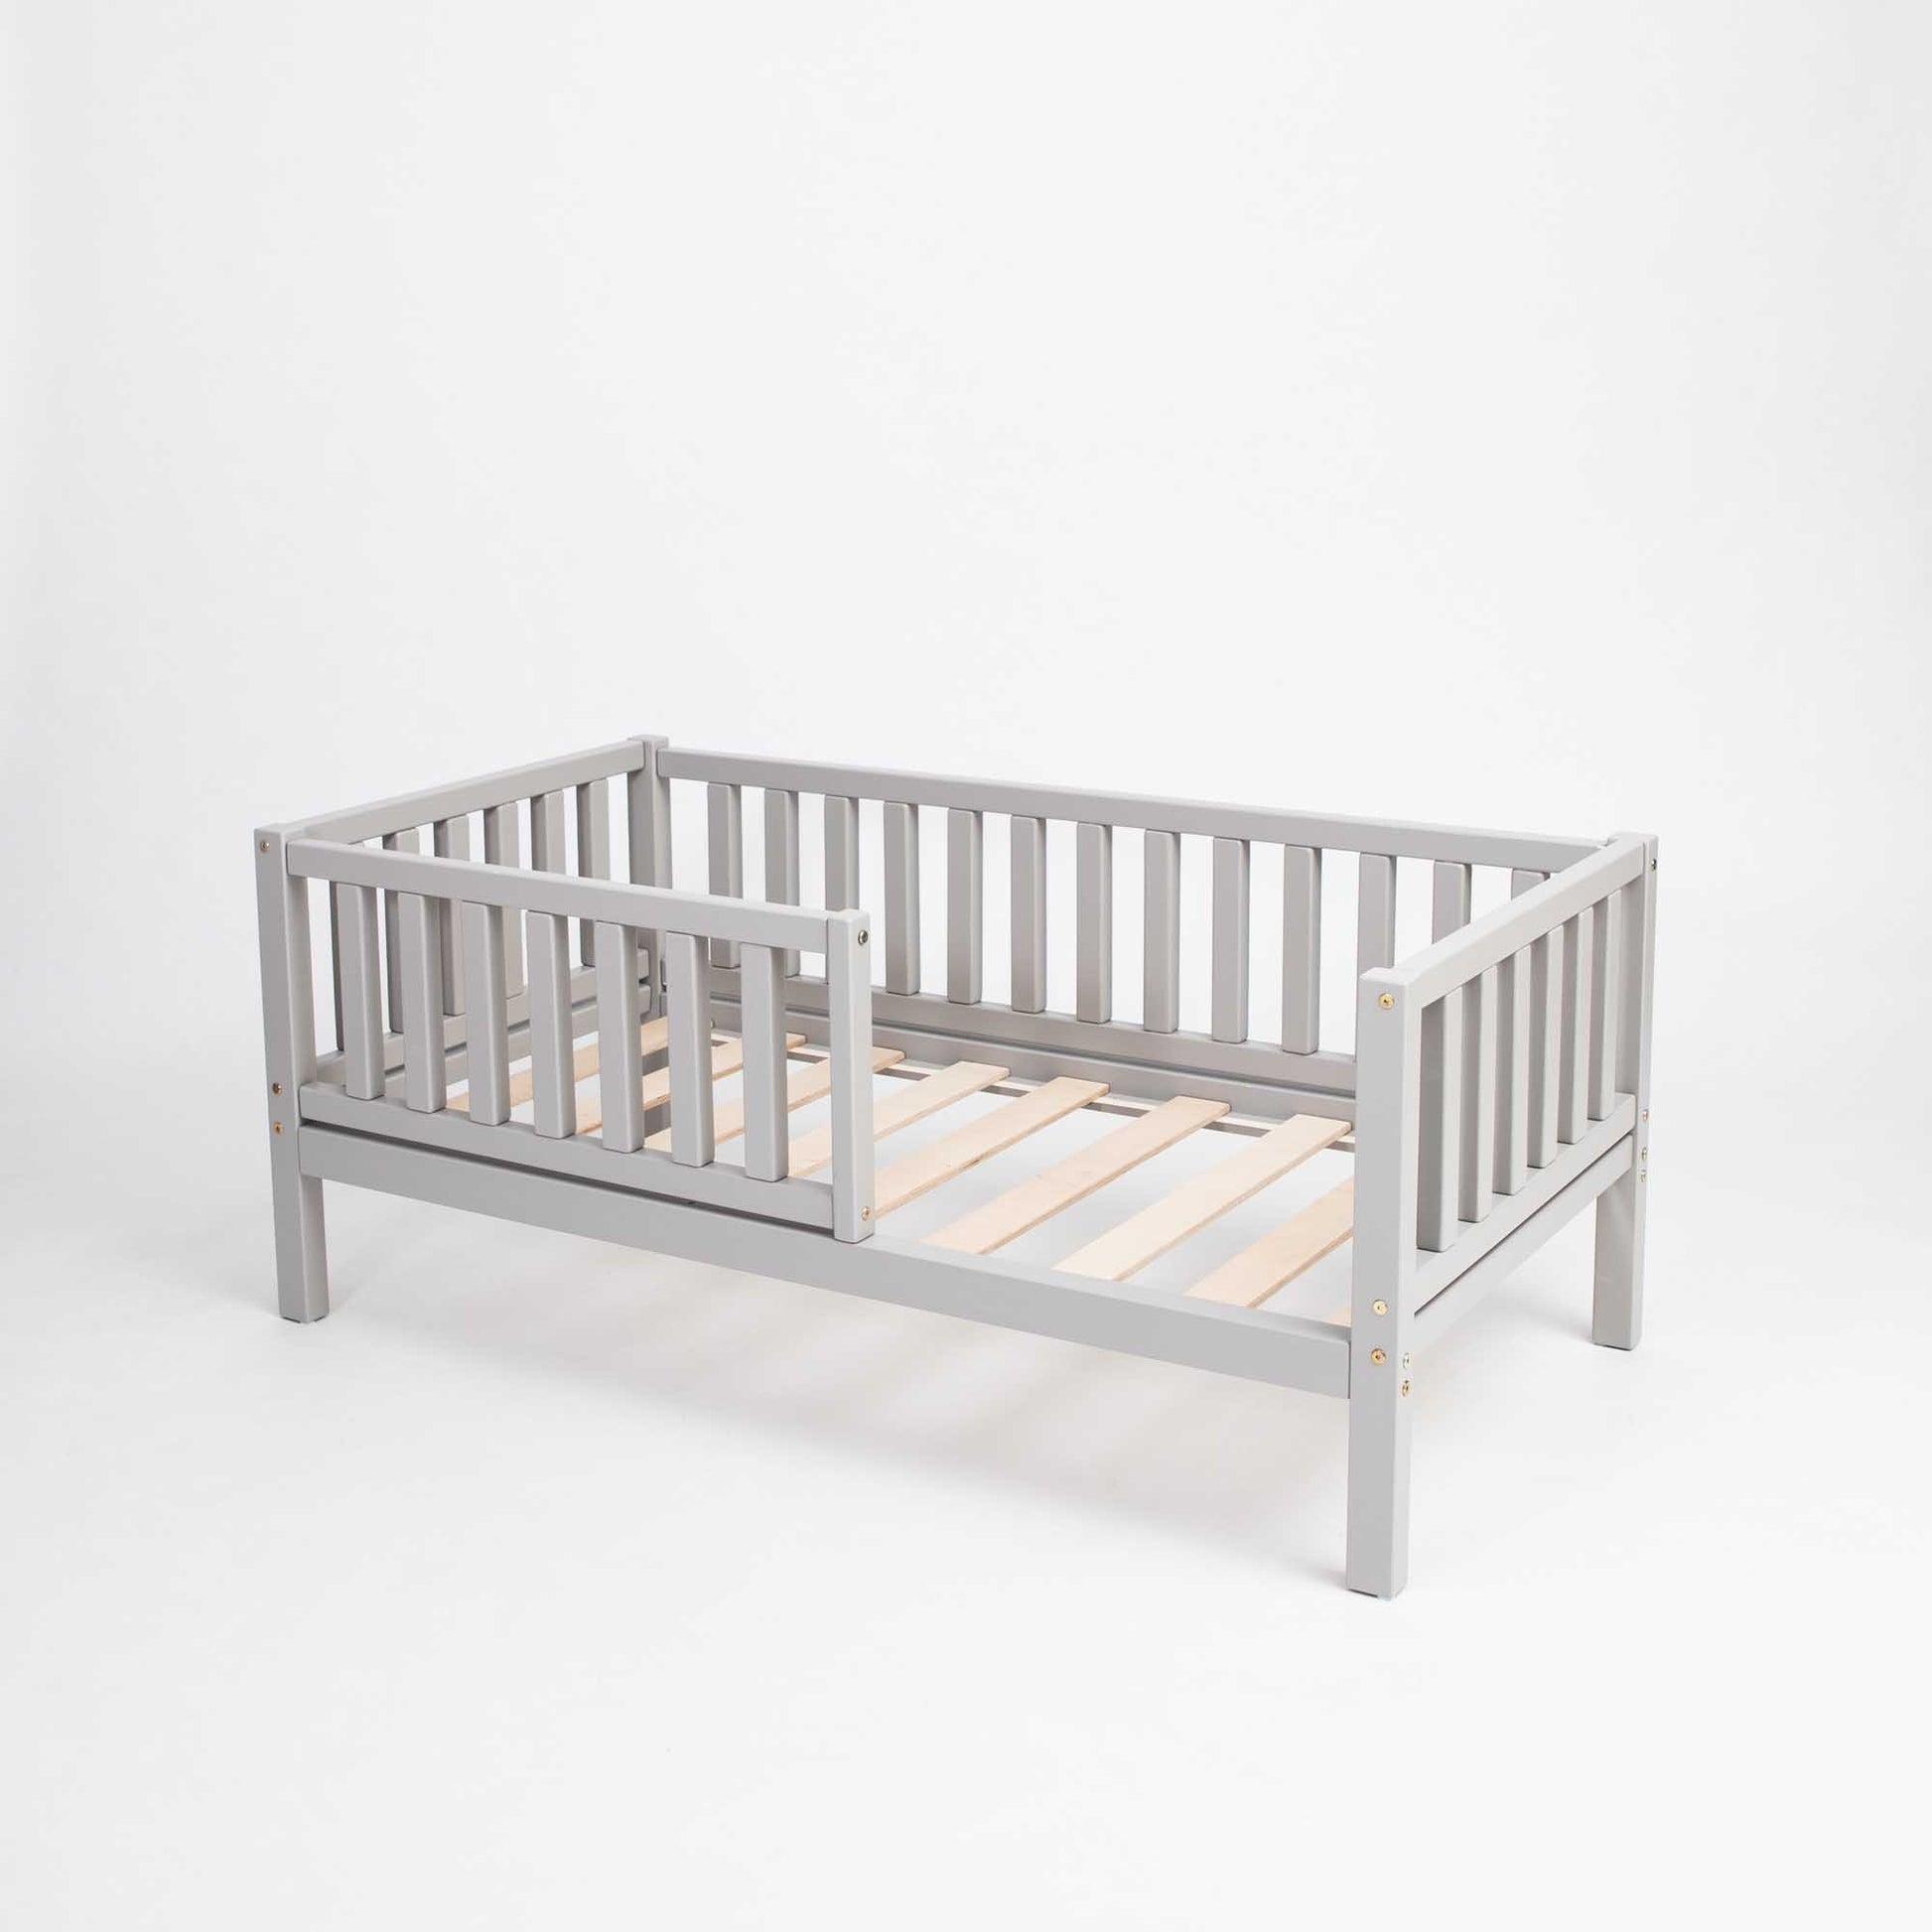 A Sweet Home From Wood toddler bed on legs with a fence, perfect for independent sleeping.